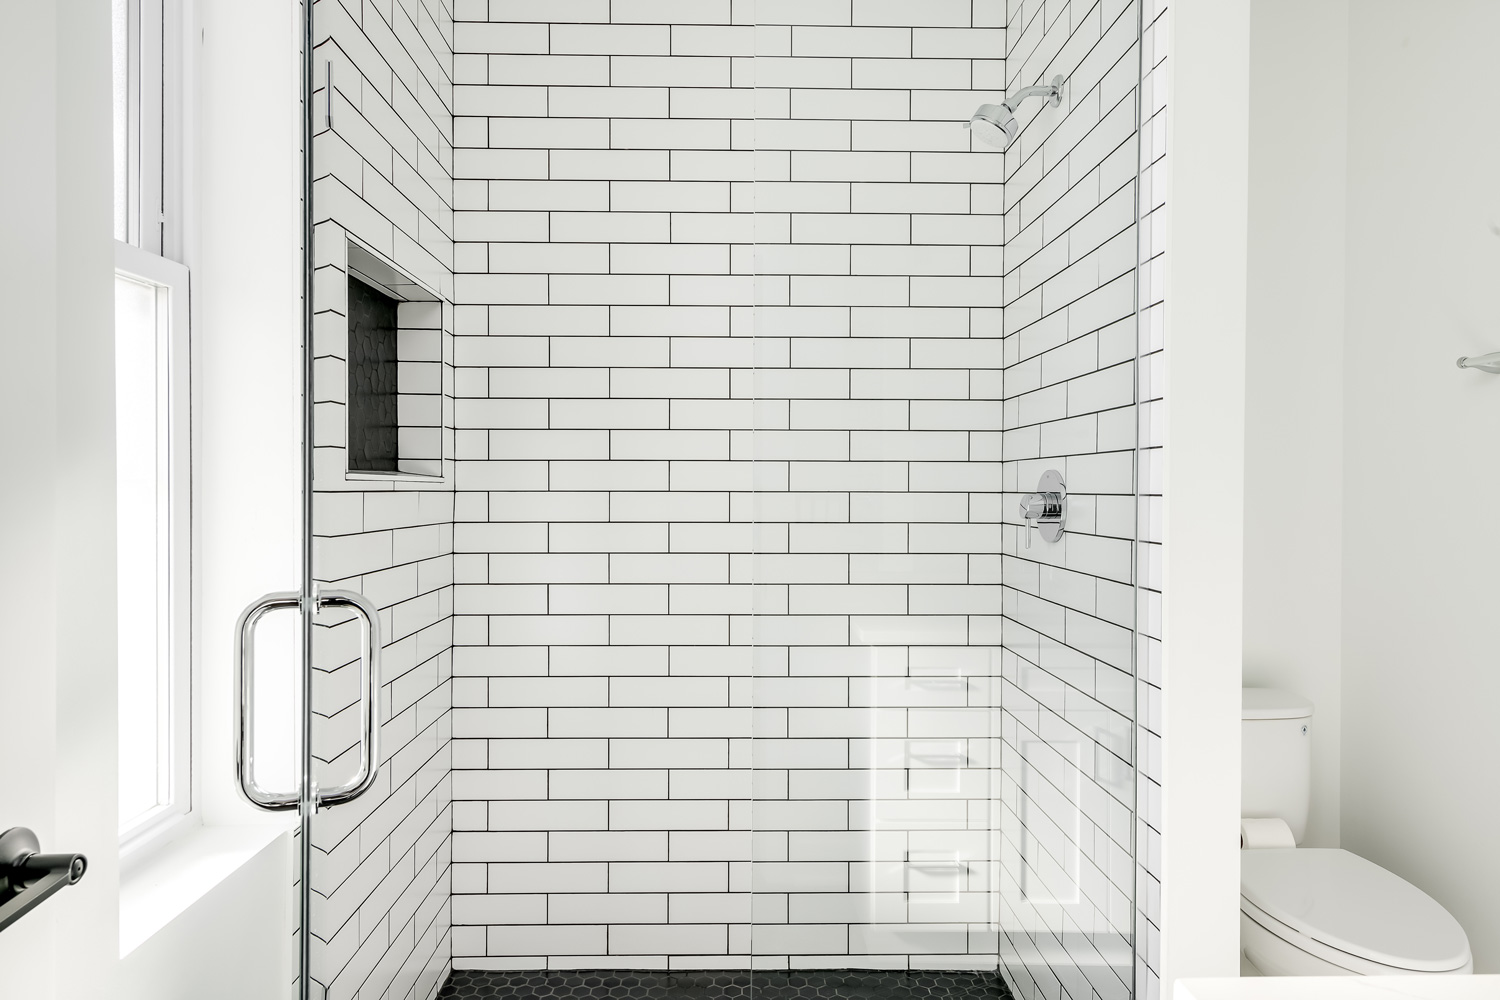 Modern All White Bathroom with White Subway Tile in Shower and Black Hexagon Tile on the Floor